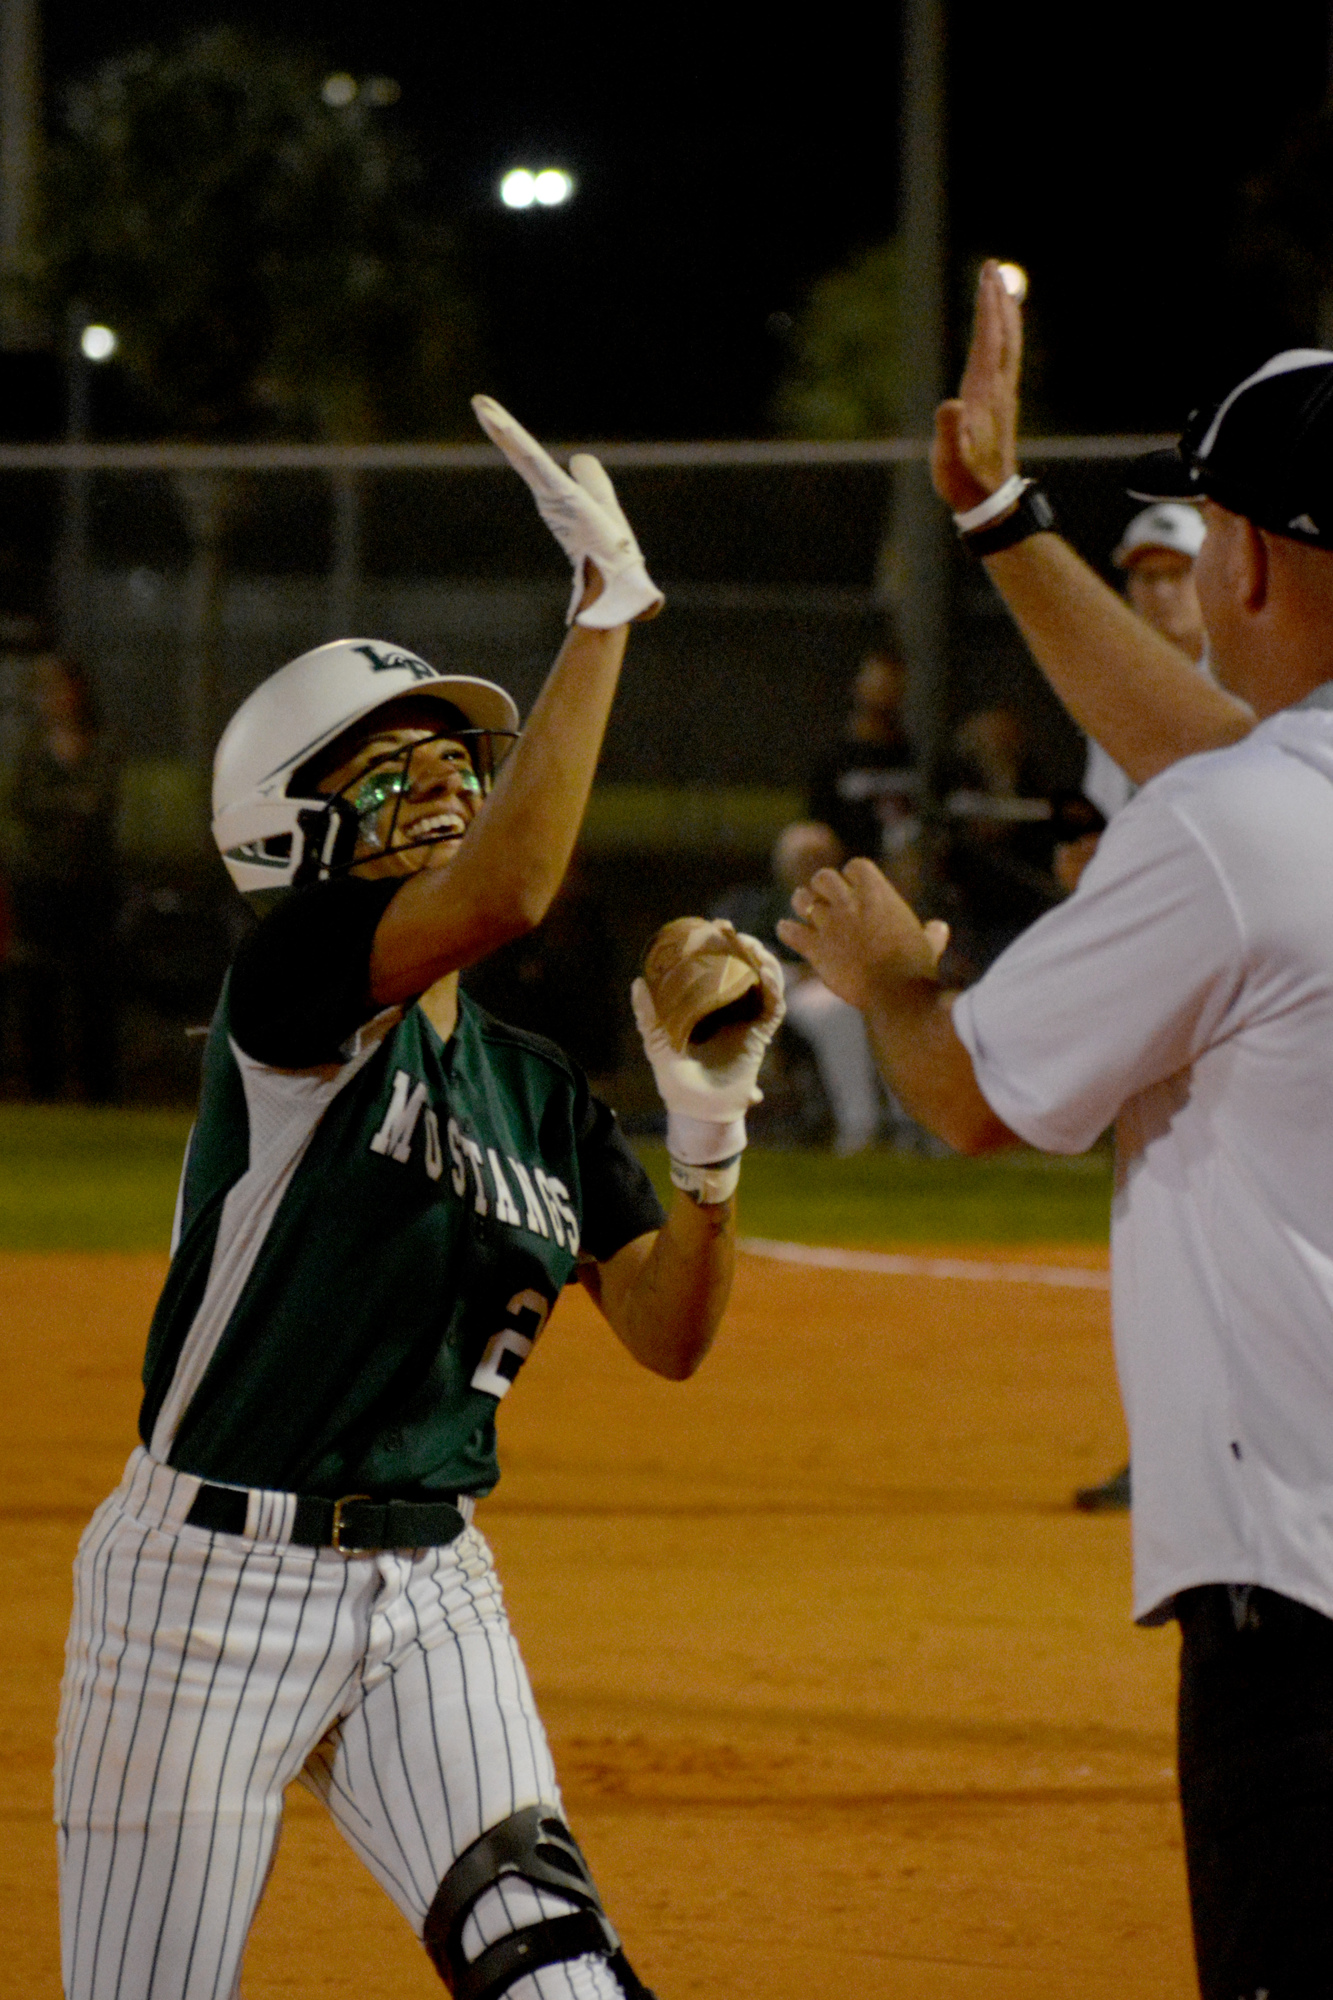 Mustangs senior Sydney McCray high-fives Coach TJ Goelz after hitting a two-run double against Inspiration Academy.